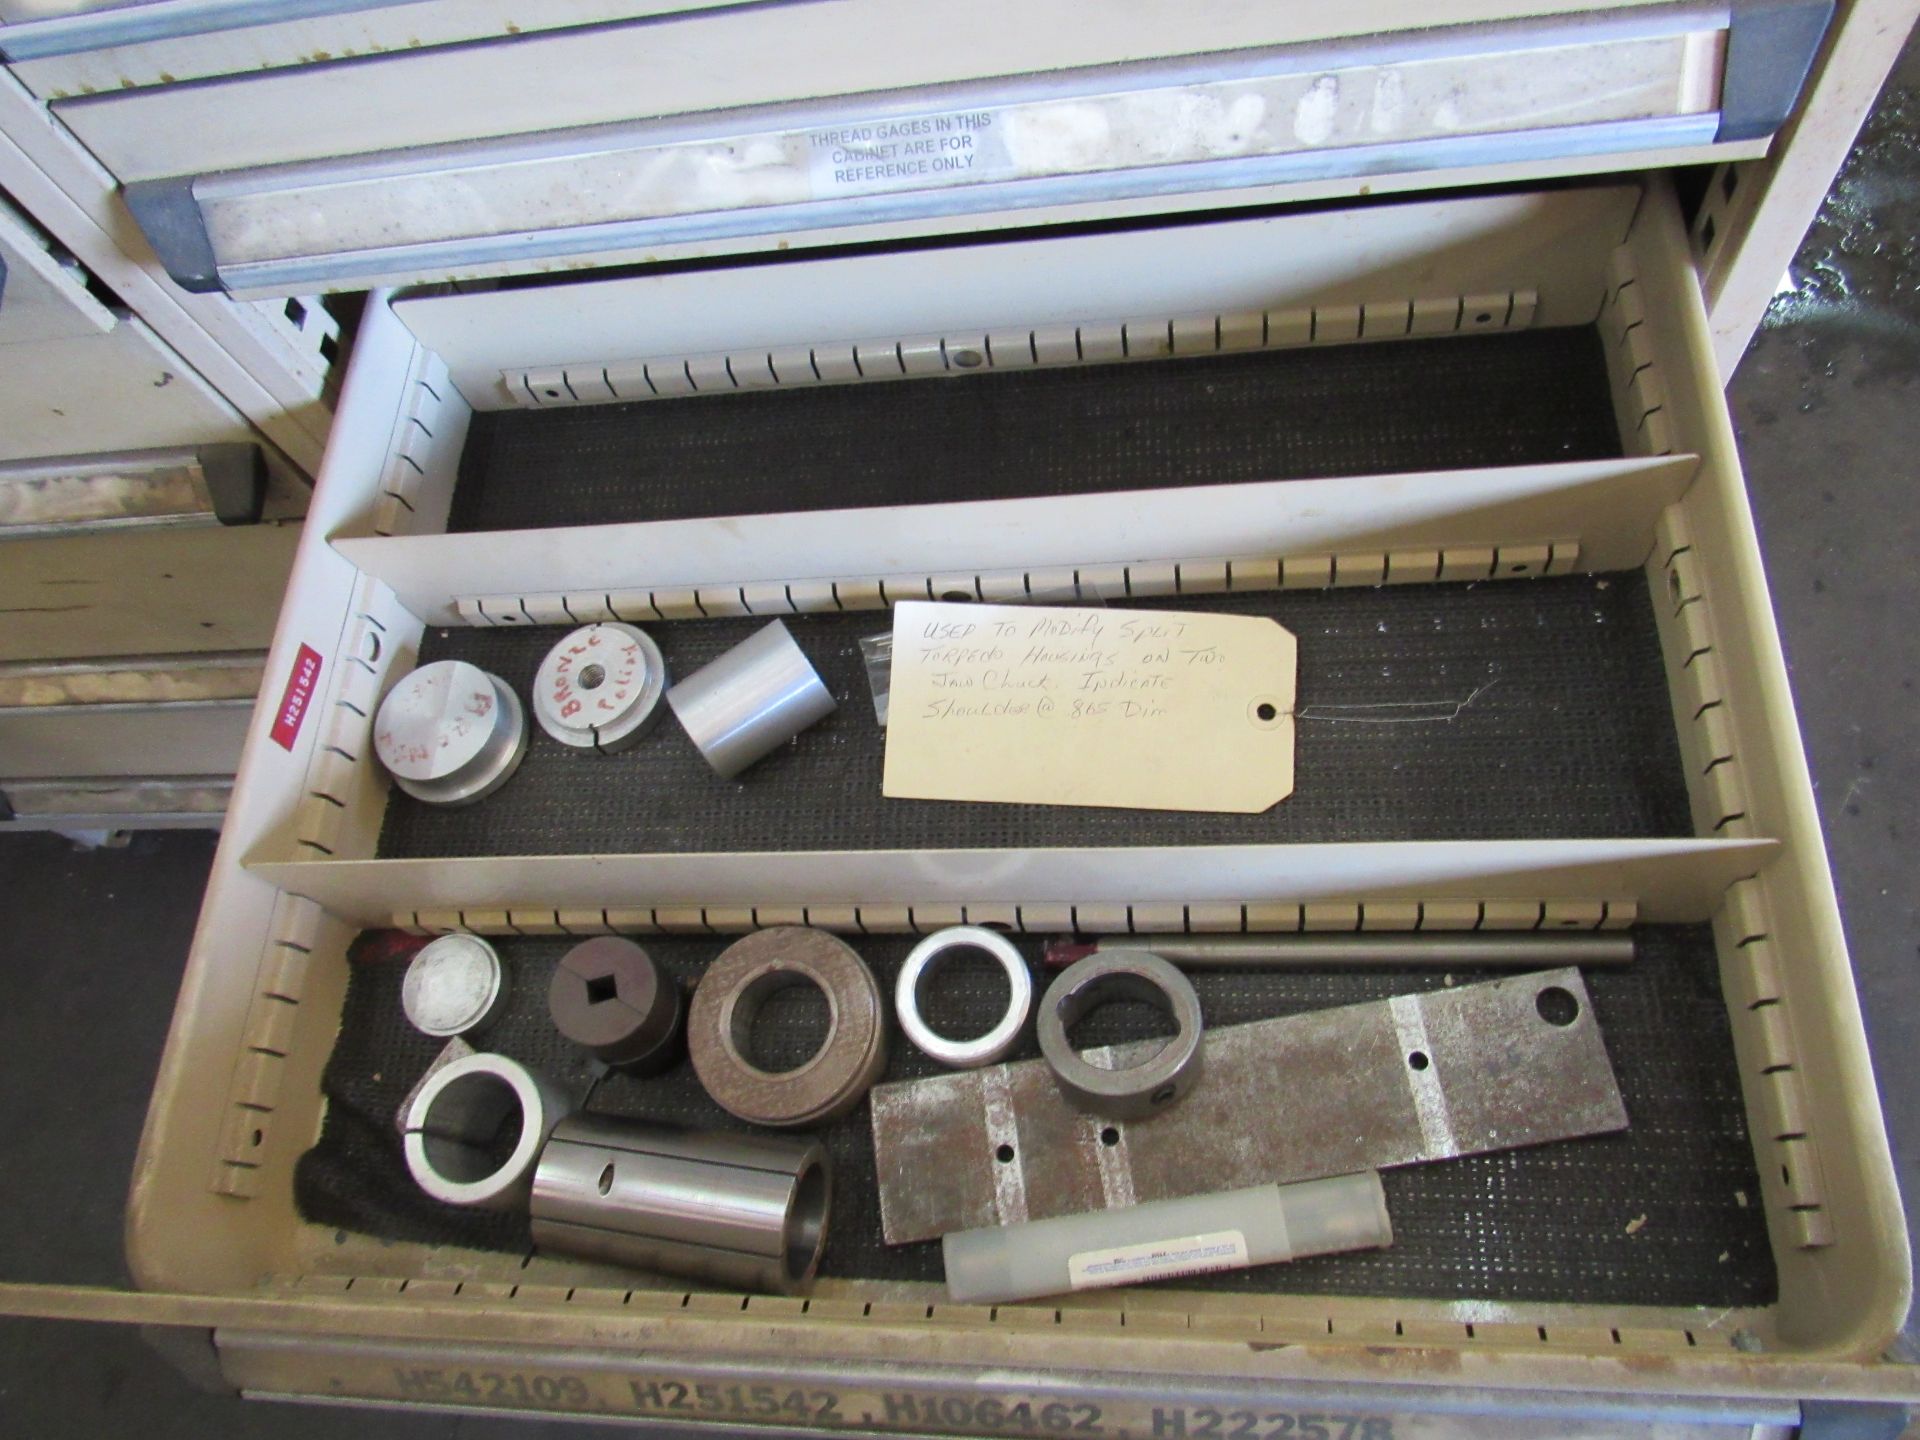 Four Kennedy 7 Drawer Tool Cabinets, Connected, with Contents (Inspections Tools, Dies, Drill - Image 4 of 7